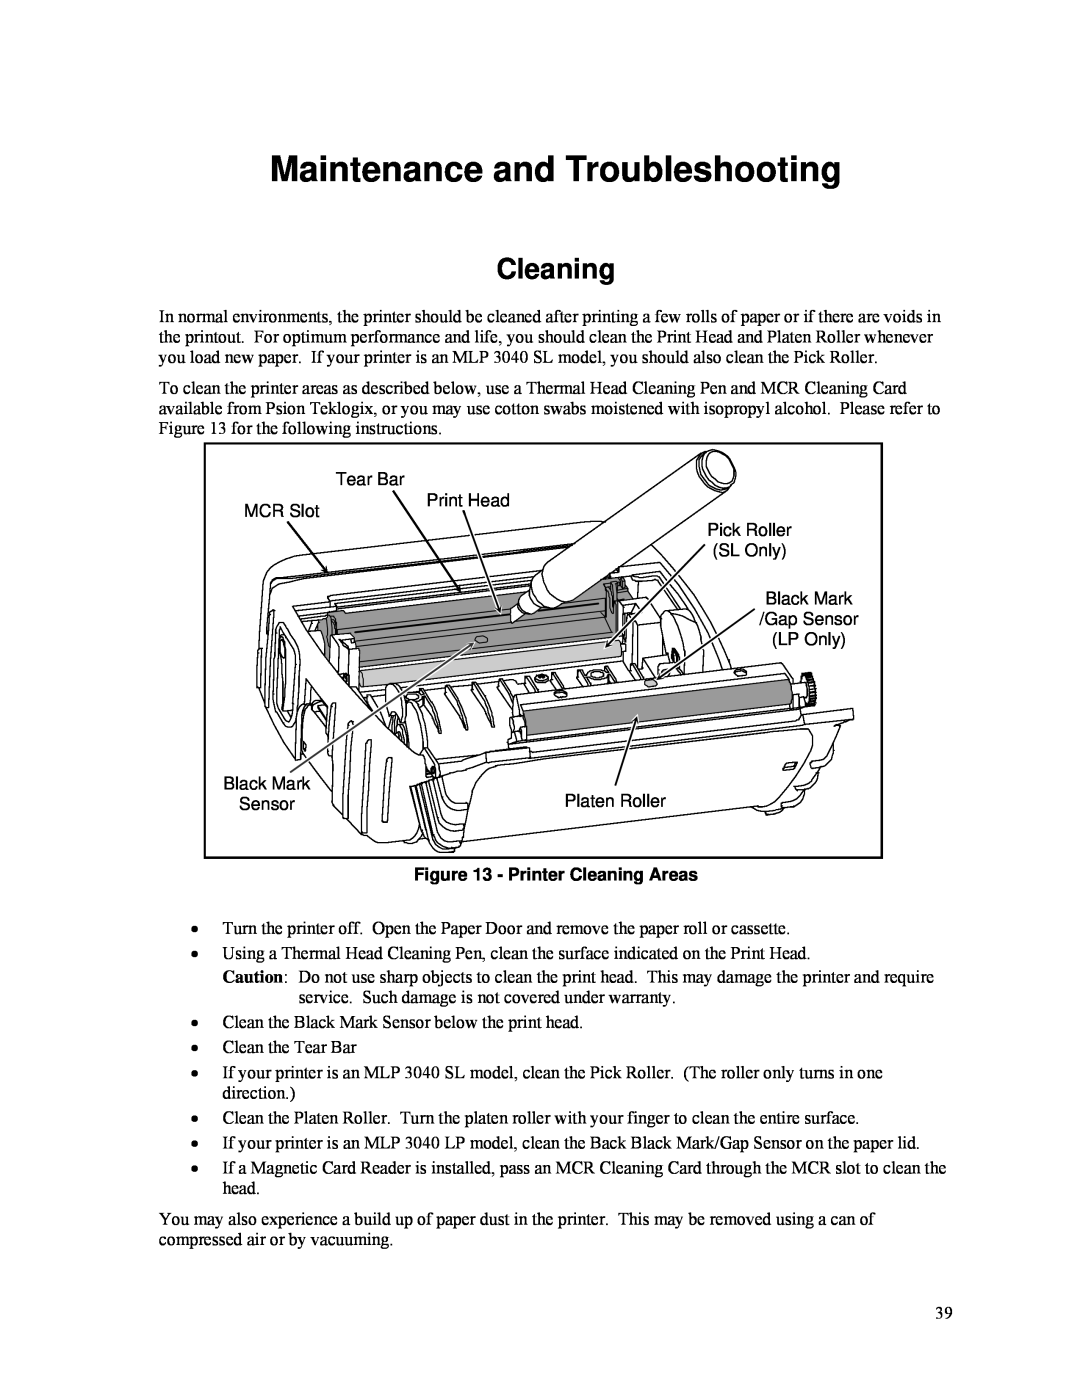 Psion Teklogix MLP 3040 Series manual Maintenance and Troubleshooting, Printer Cleaning Areas 